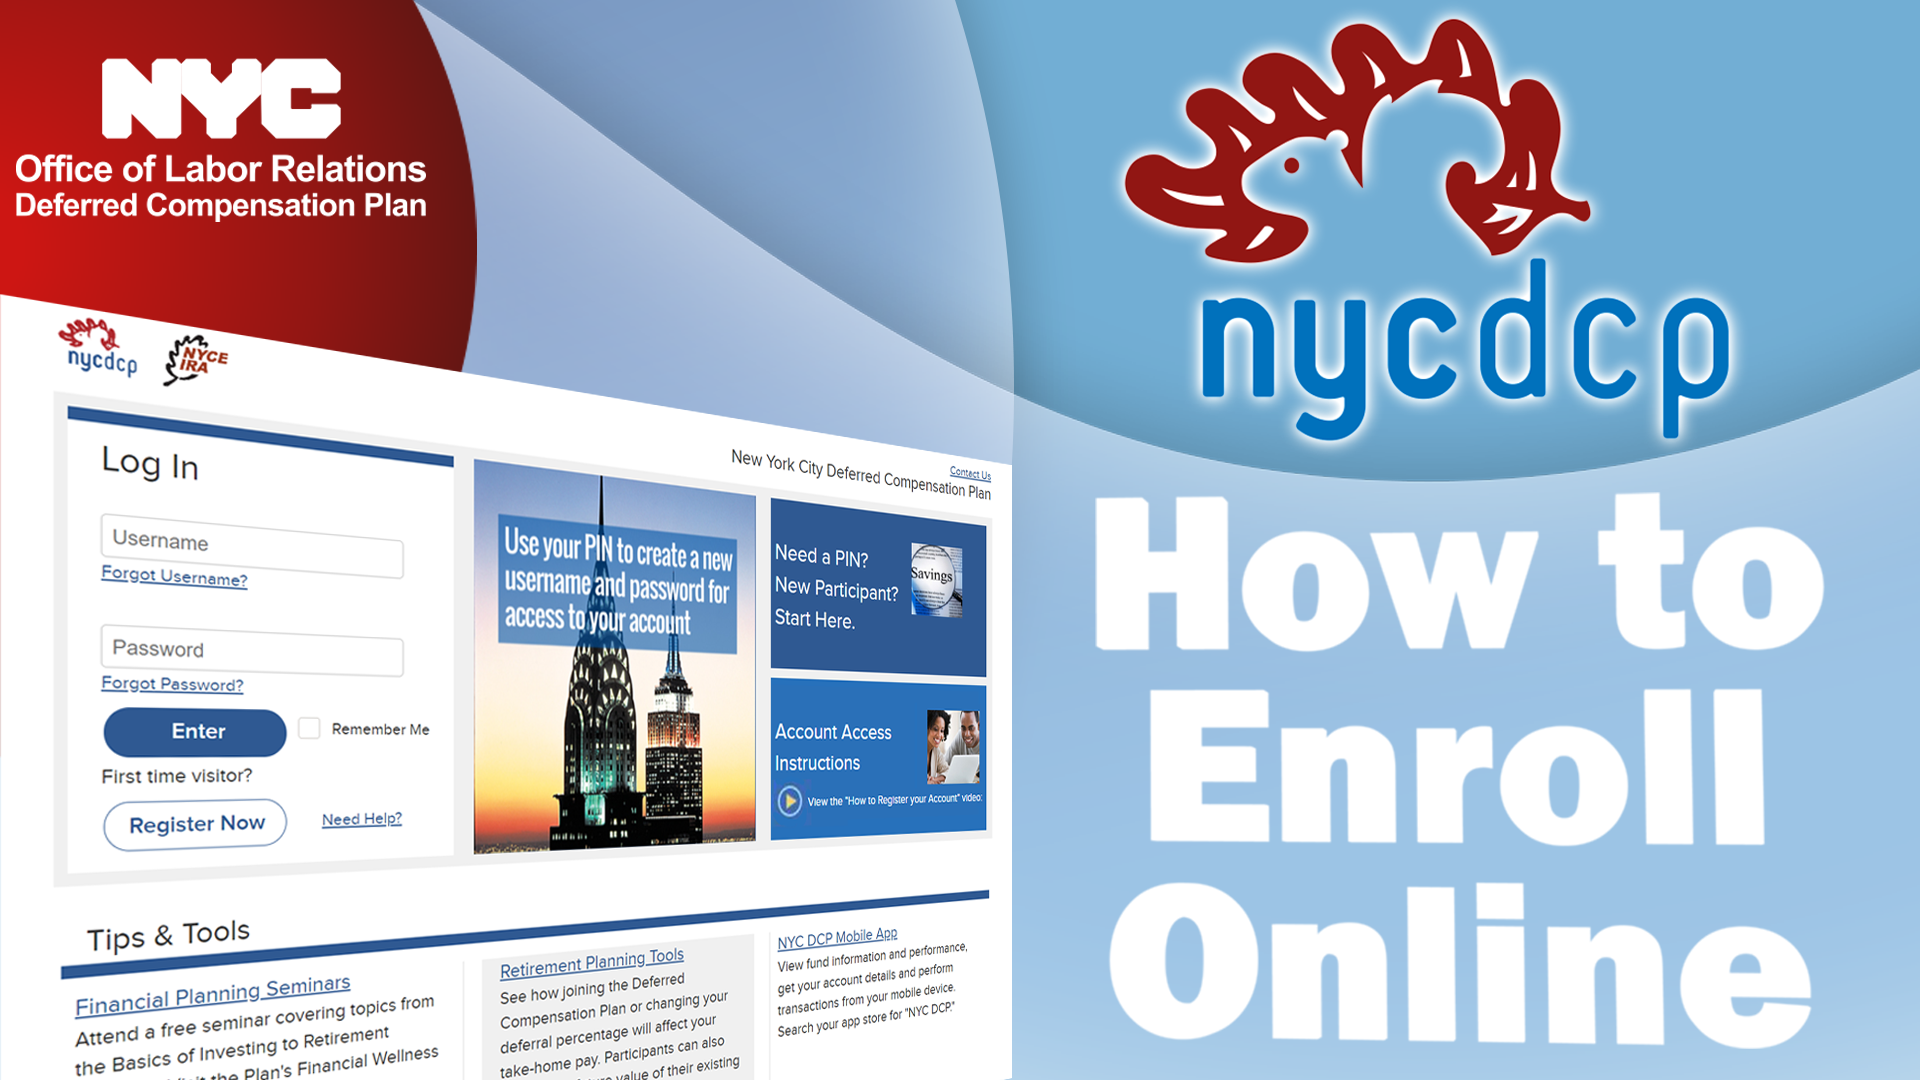 The words "How to Enroll Online" on a computer screen